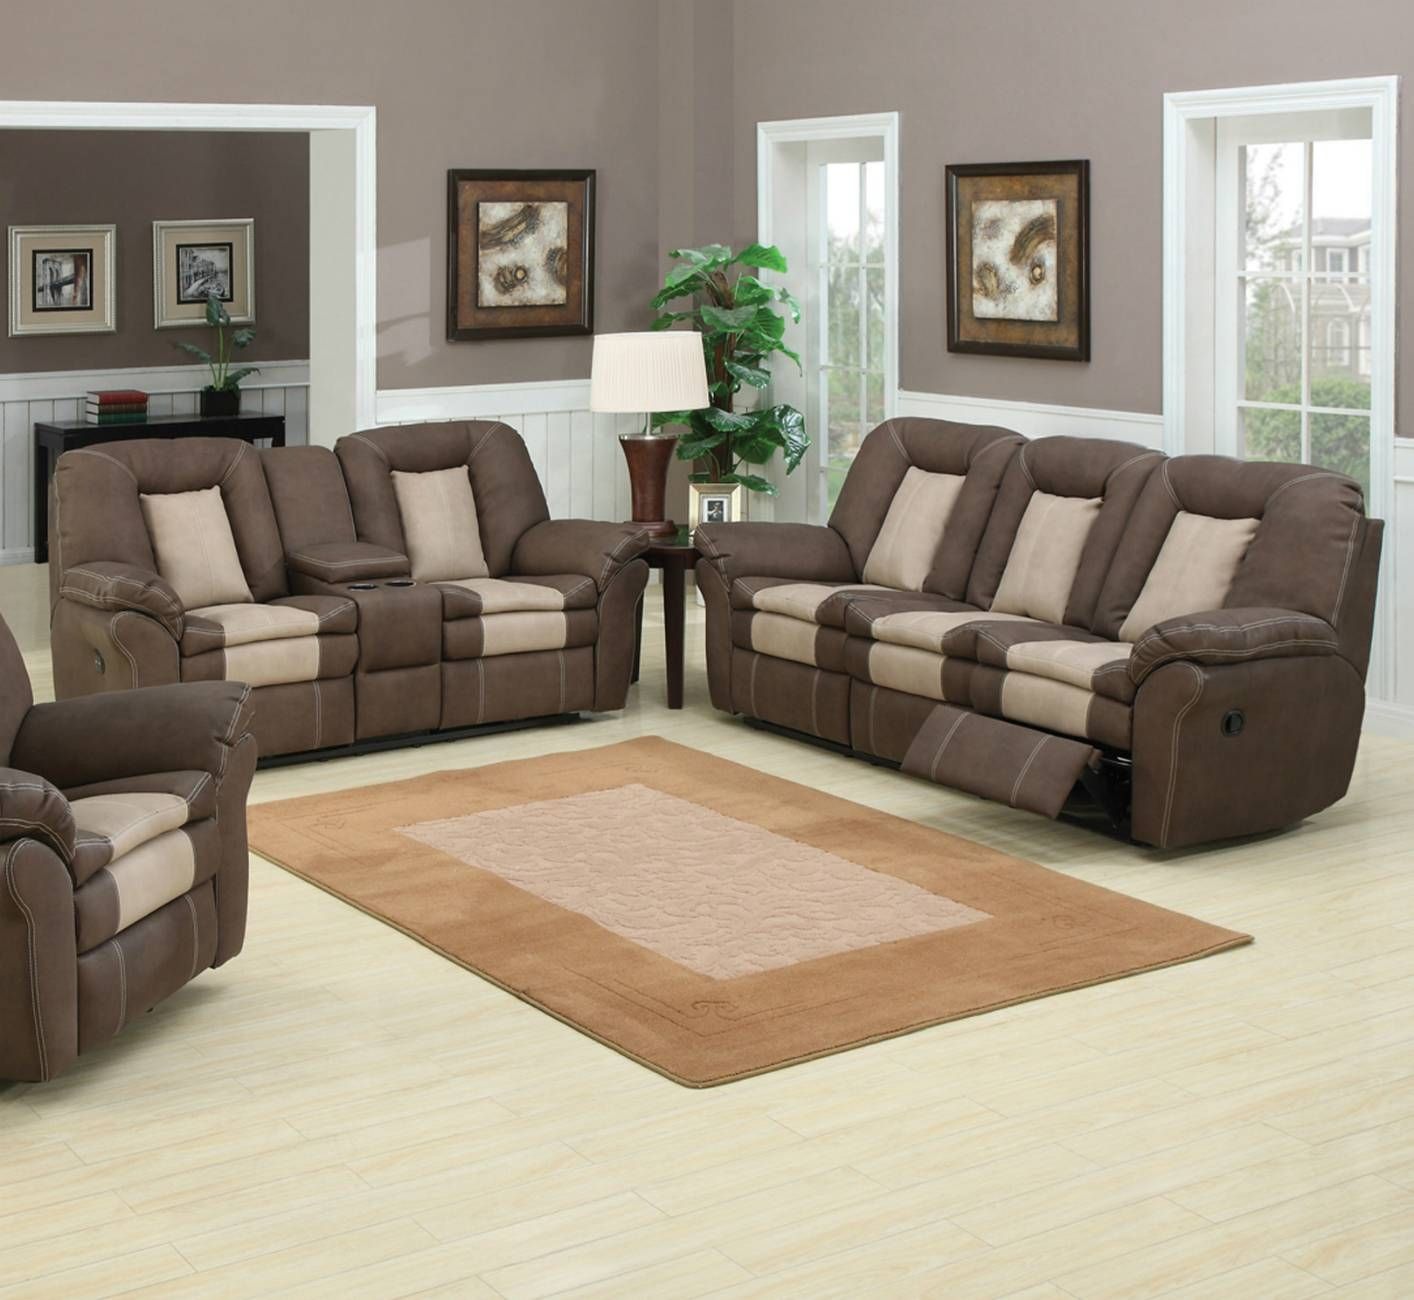 28+ [ Sofa Loveseat Sets ] | Paige Collection 3350 Leather Pertaining To Reclining Sofas And Loveseats Sets (View 9 of 15)